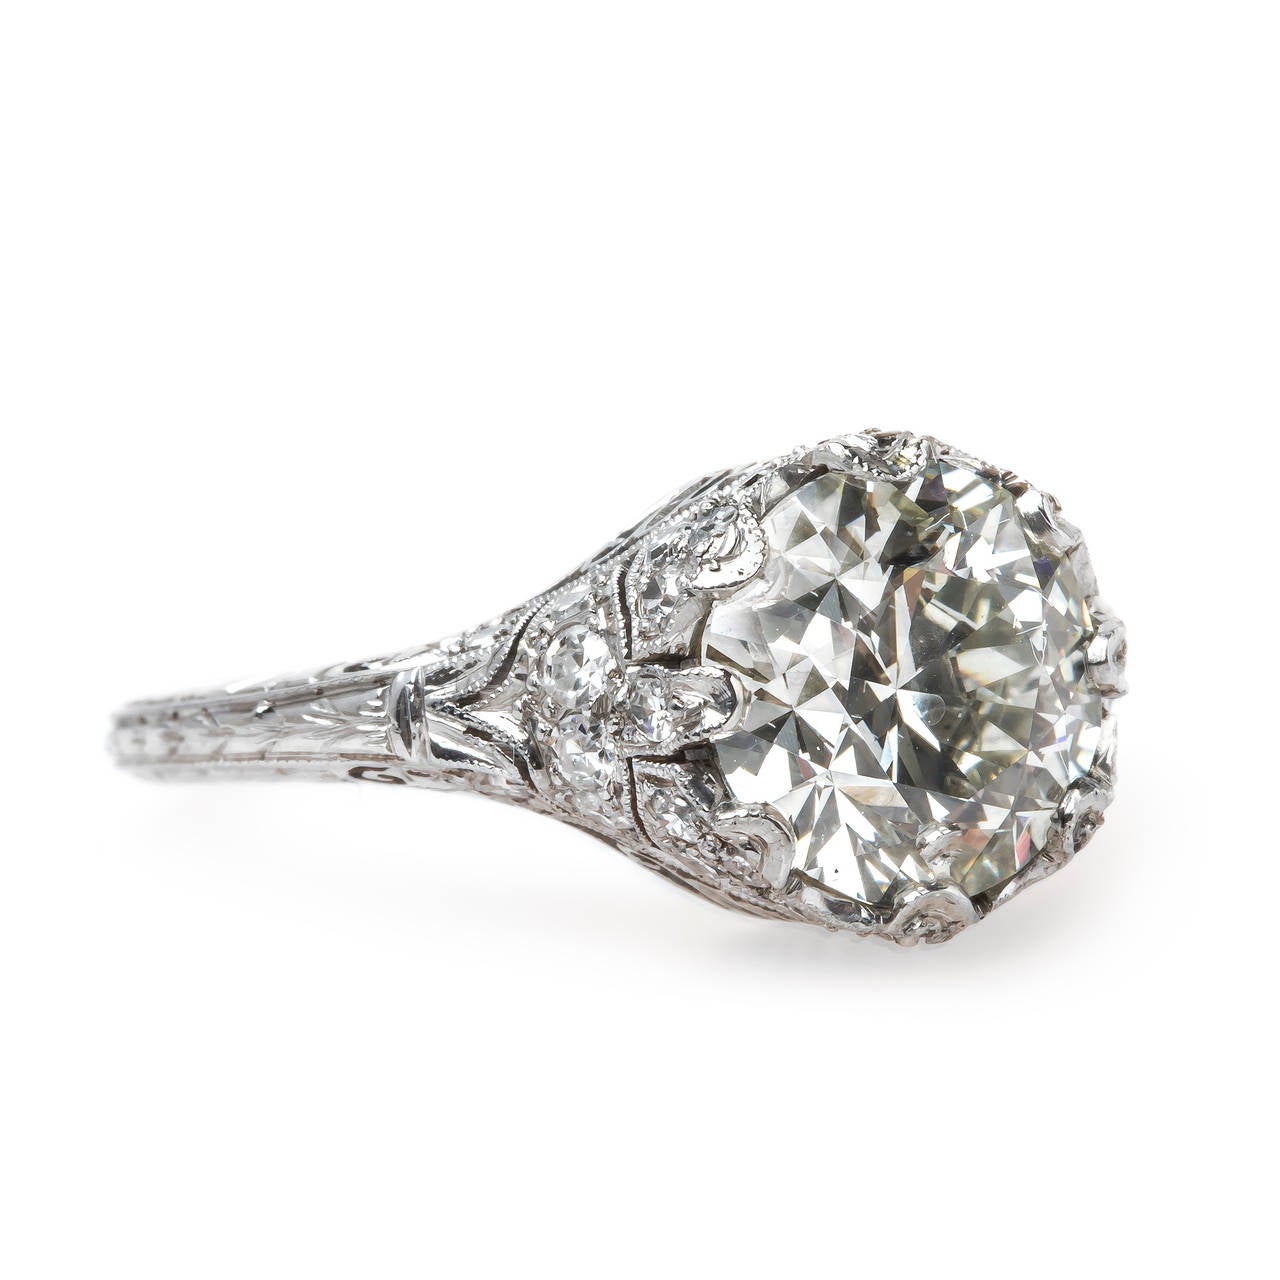 Incredible Over-the-Top Edwardian Diamond Platinum Engagement Ring 1